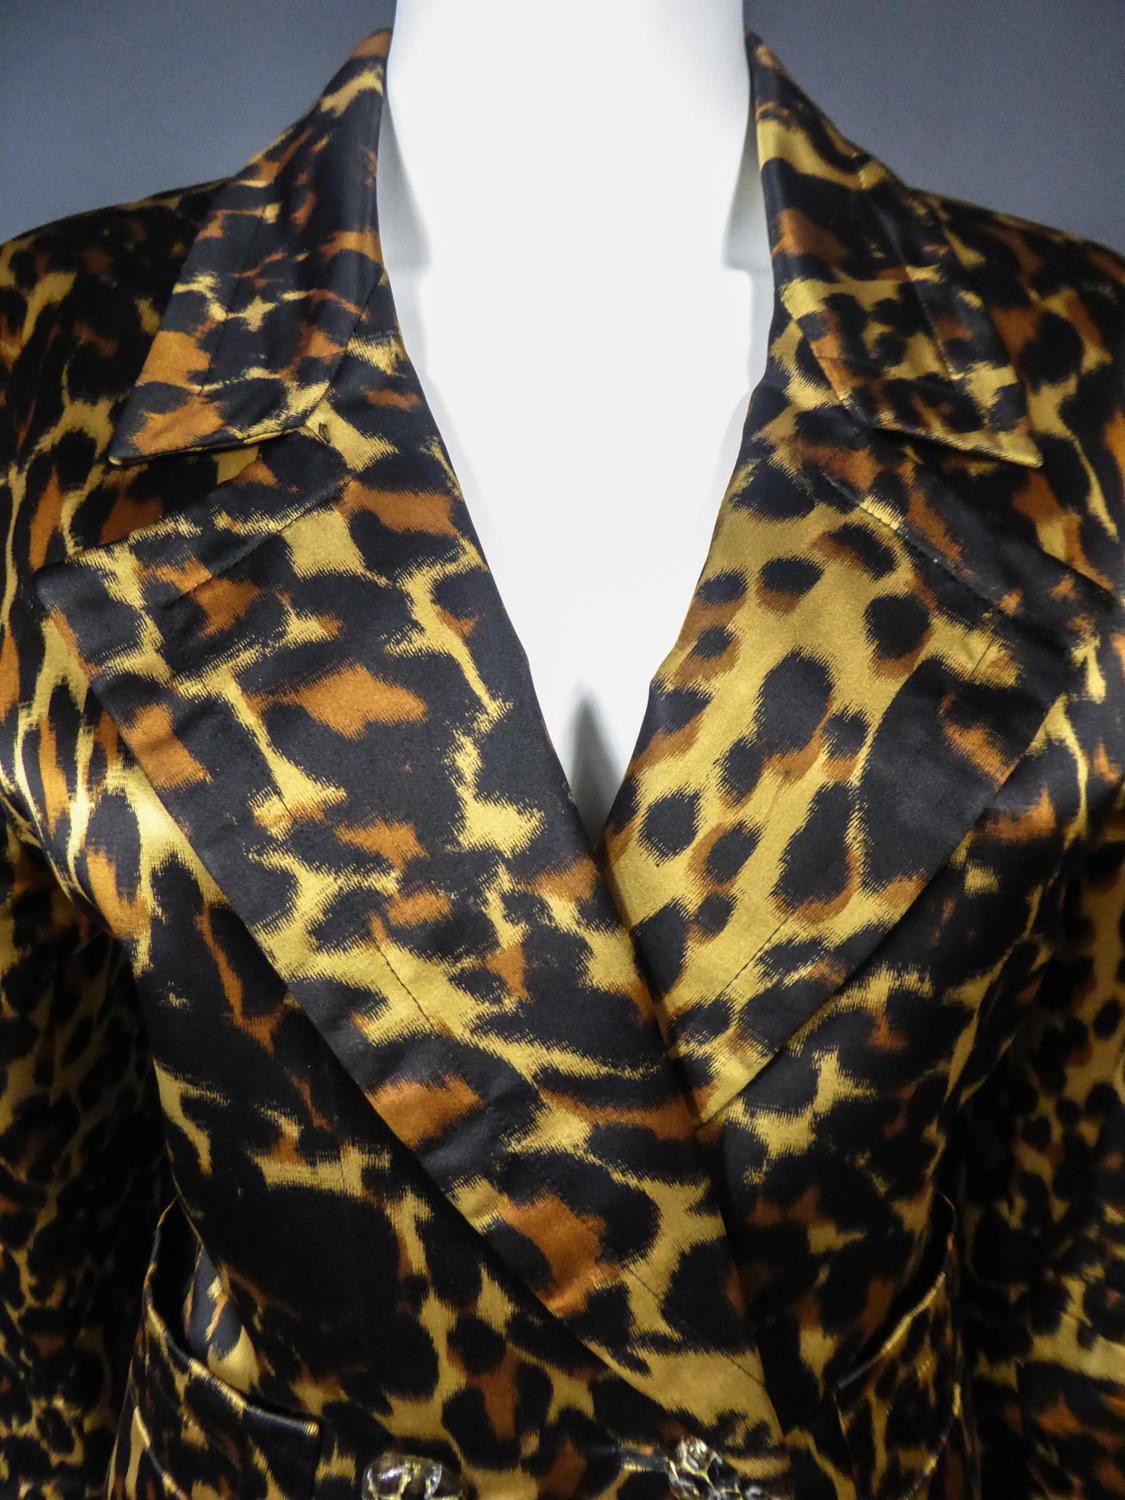 Yves Saint Laurent Printed Panther Satin (attributed to) Skirt Suit Circa 1990 For Sale 1